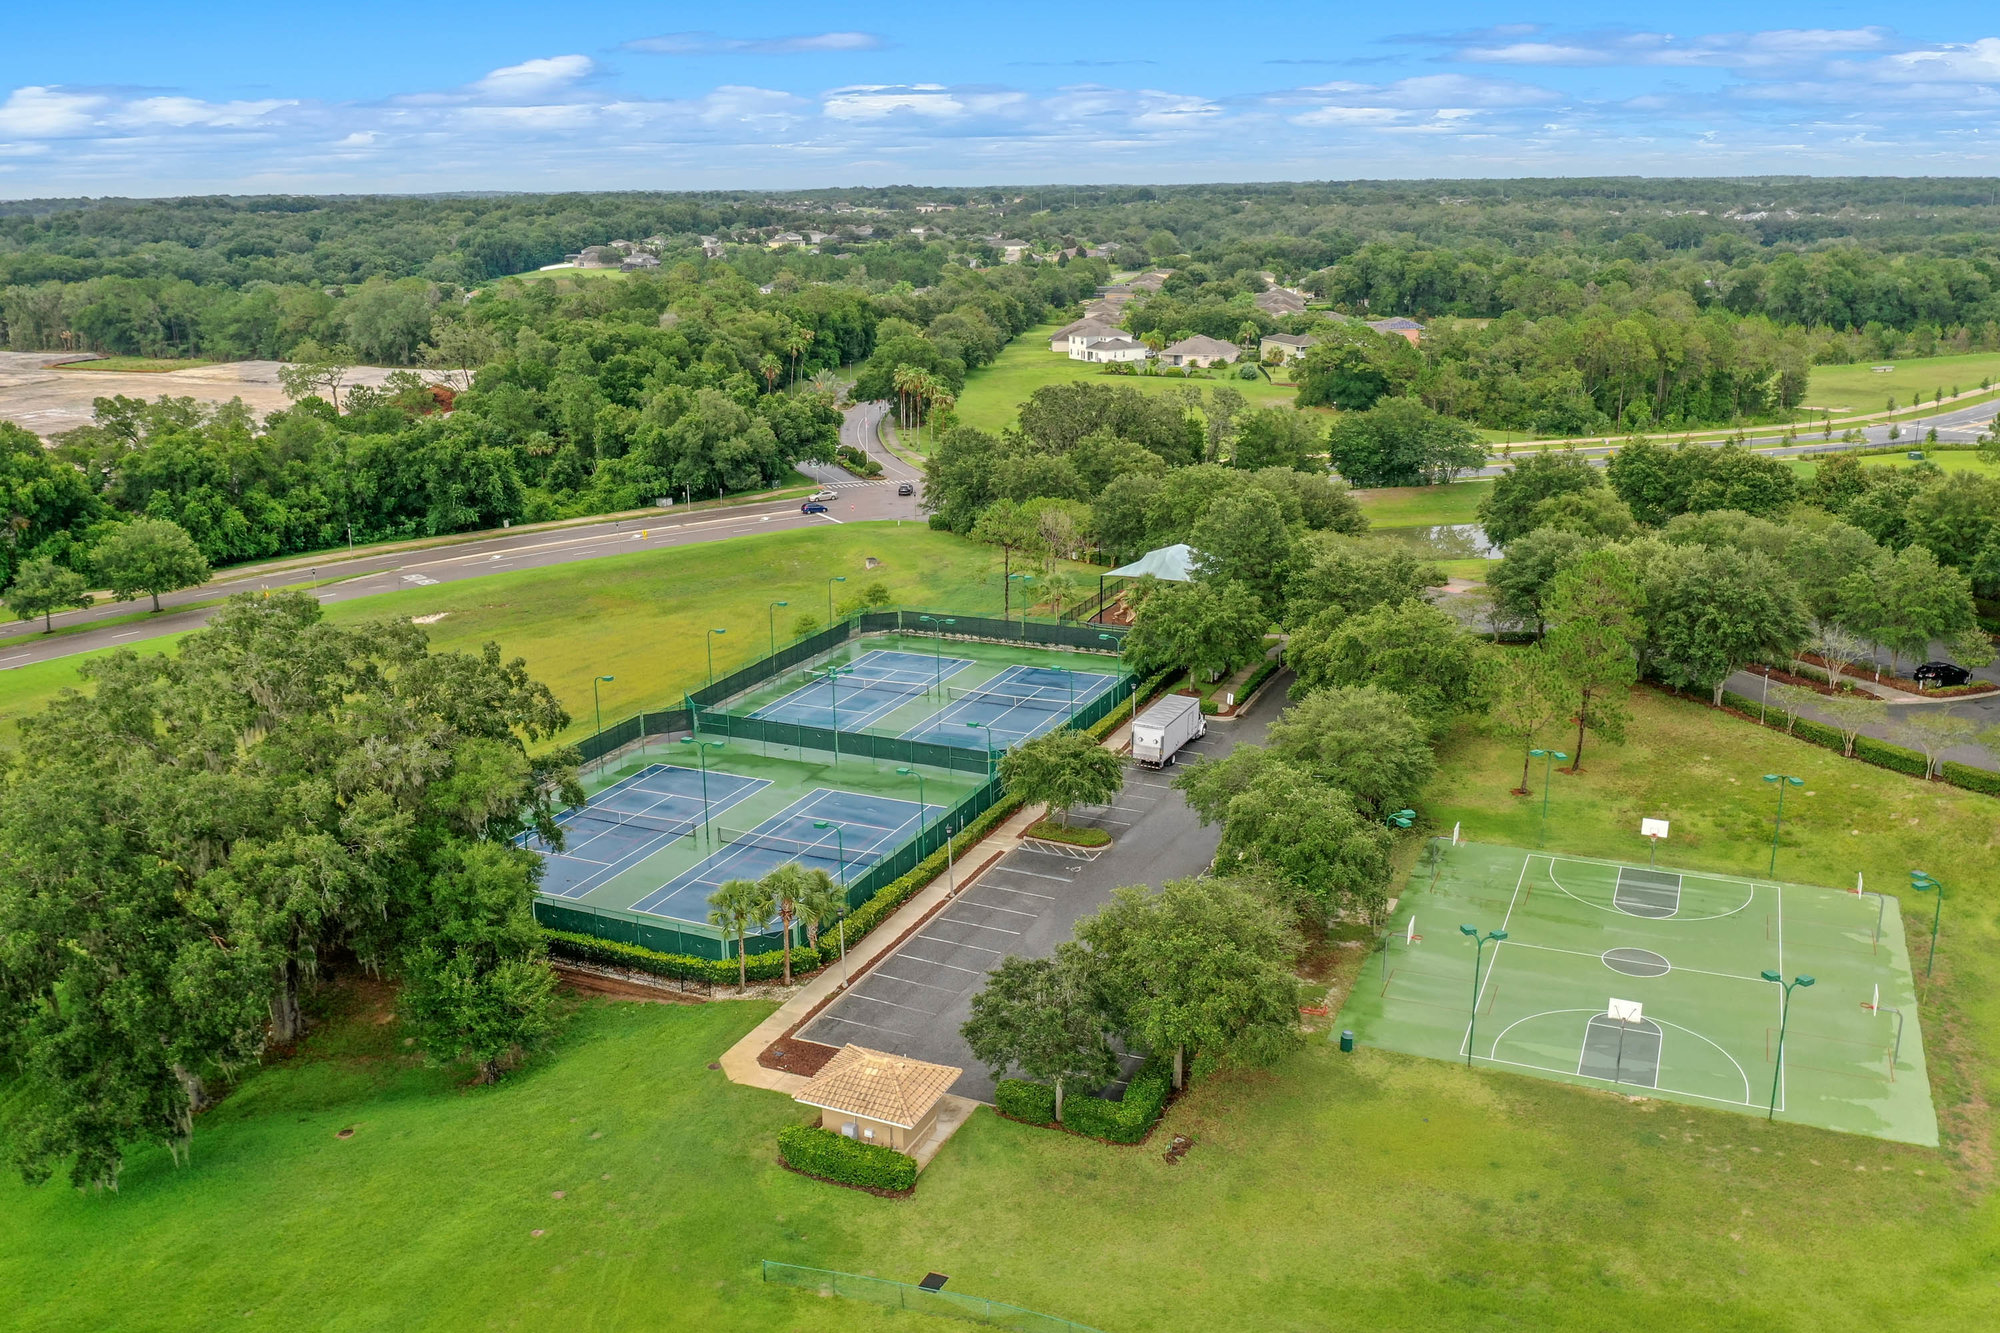 drone shot of tennis and basketball courts